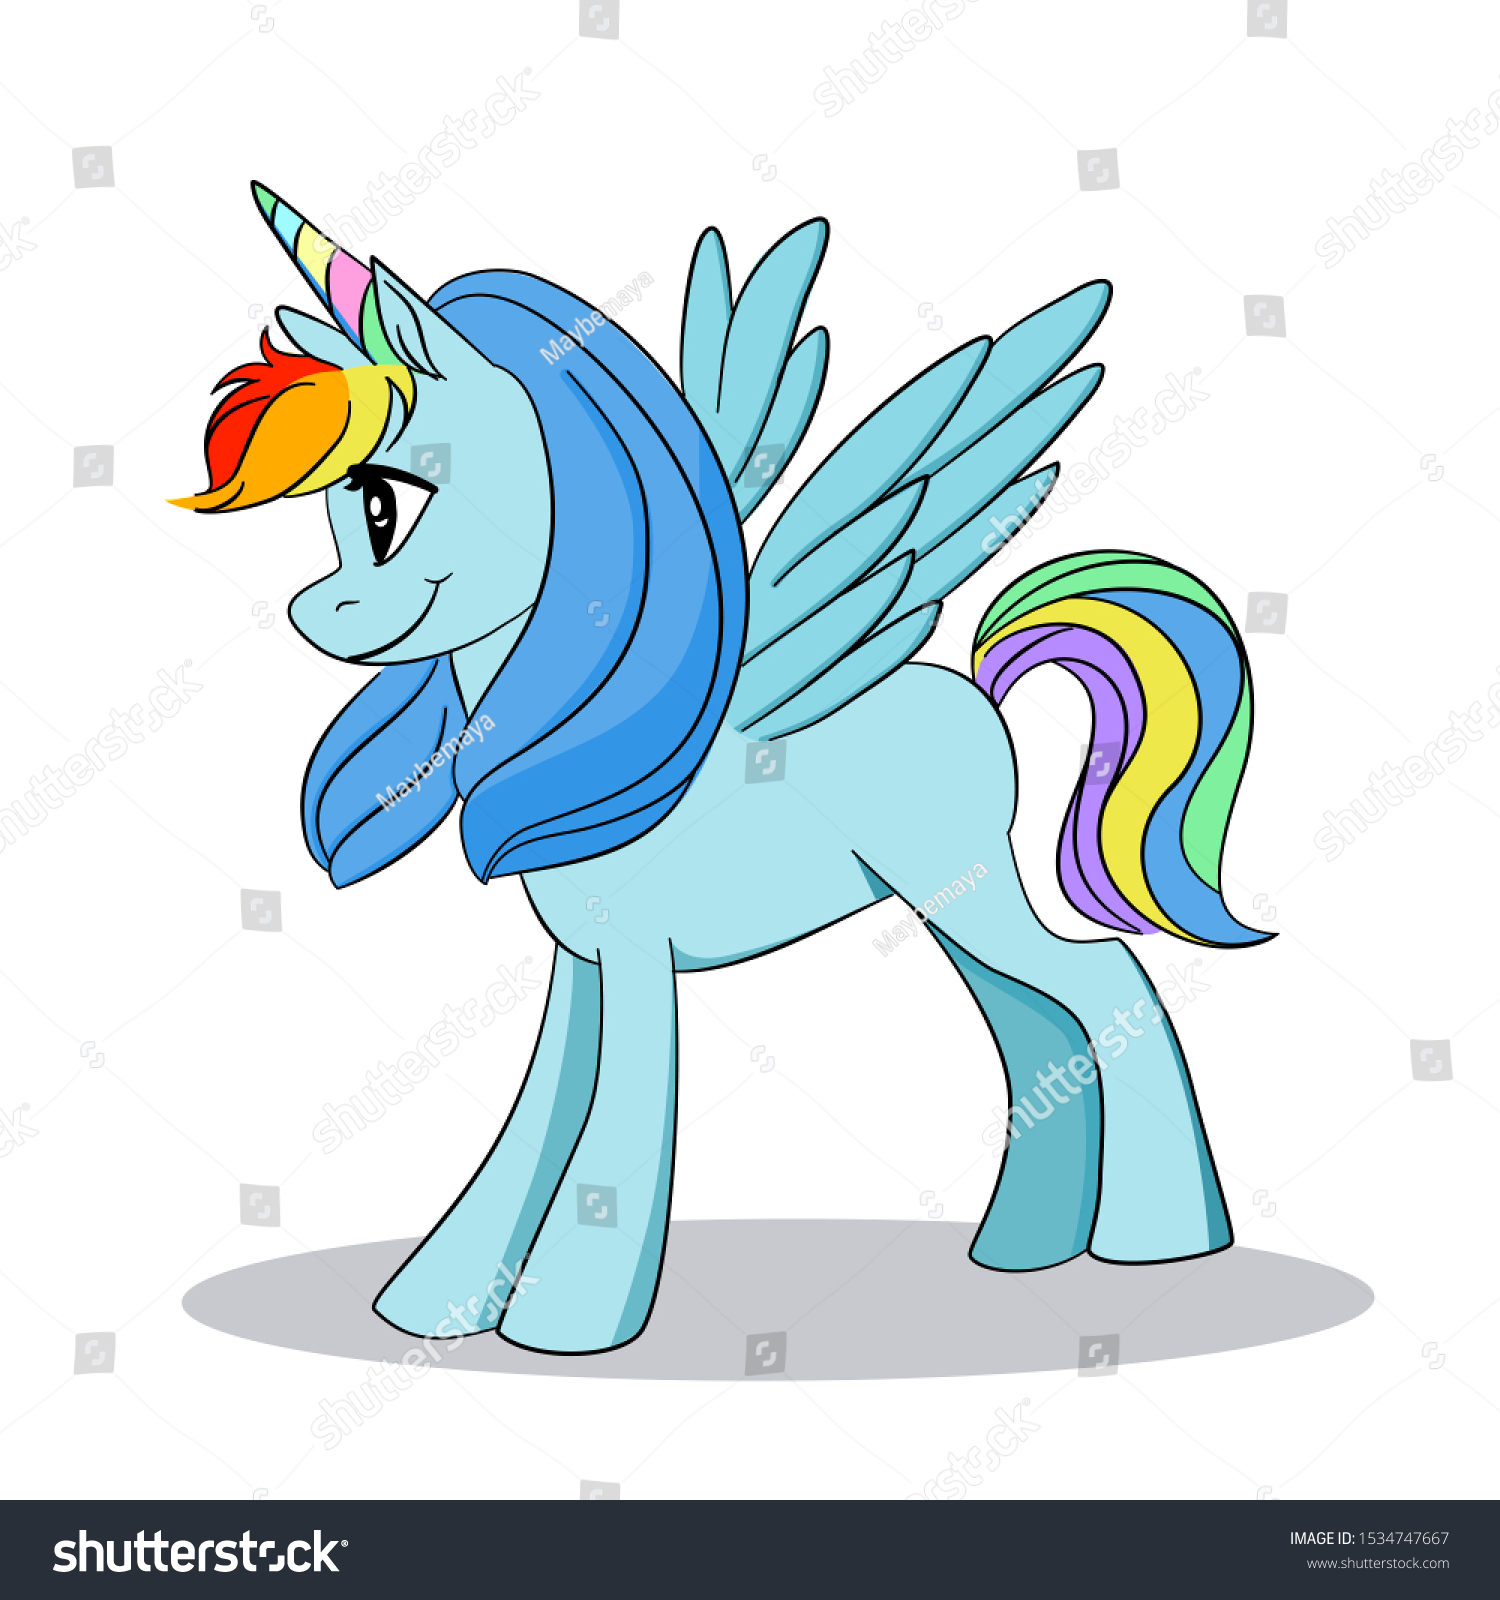 SVG of Cute hand drawn cartoon character Pony unicorn. Little blue horse with colorful rainbow hair, tail and horn. Vector illustration isolated on white background , my little pony friendship, Rainbow Dash. svg